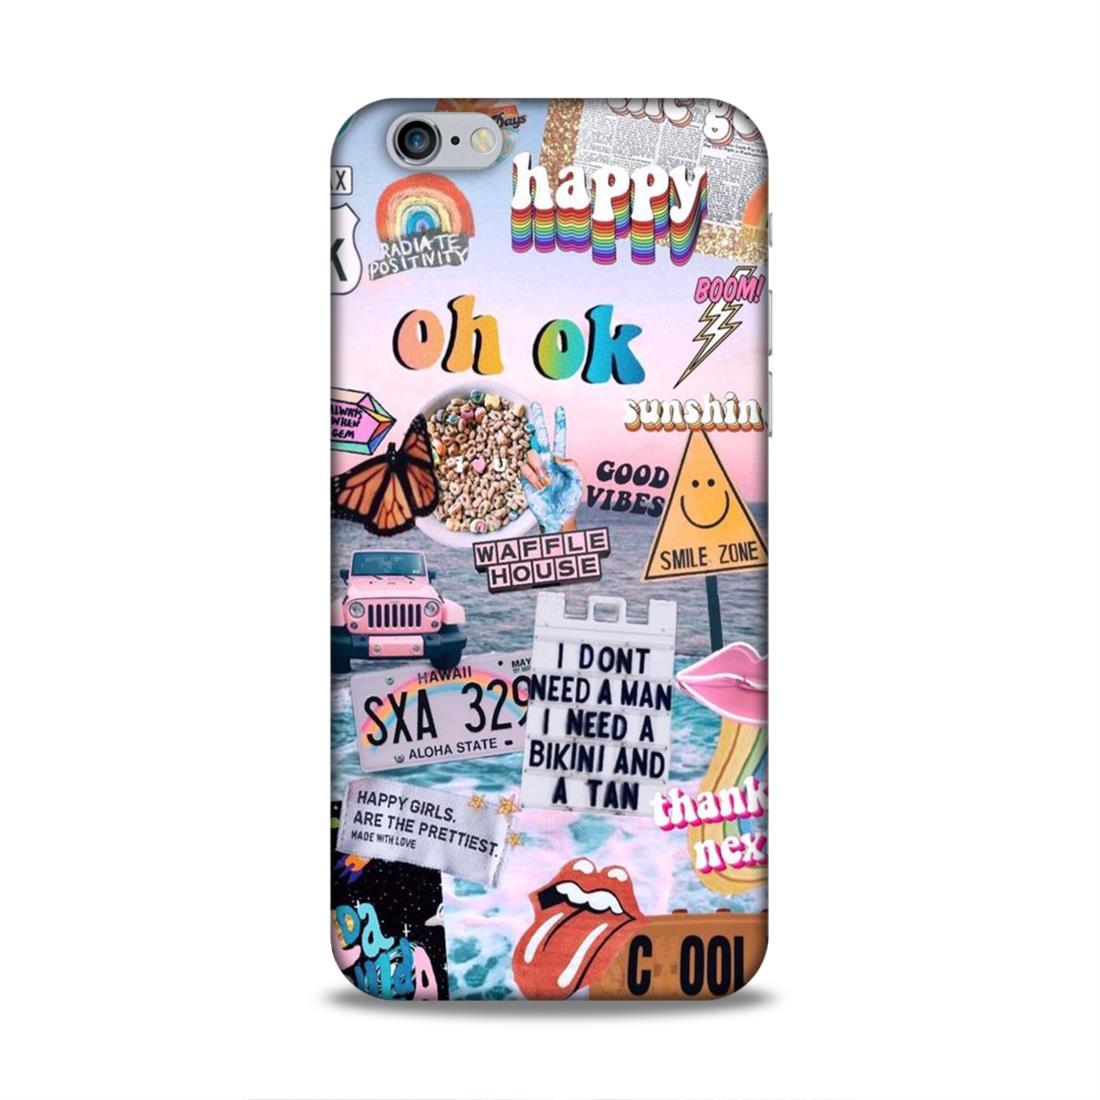 Oh Ok Happy iPhone 6s Phone Case Cover